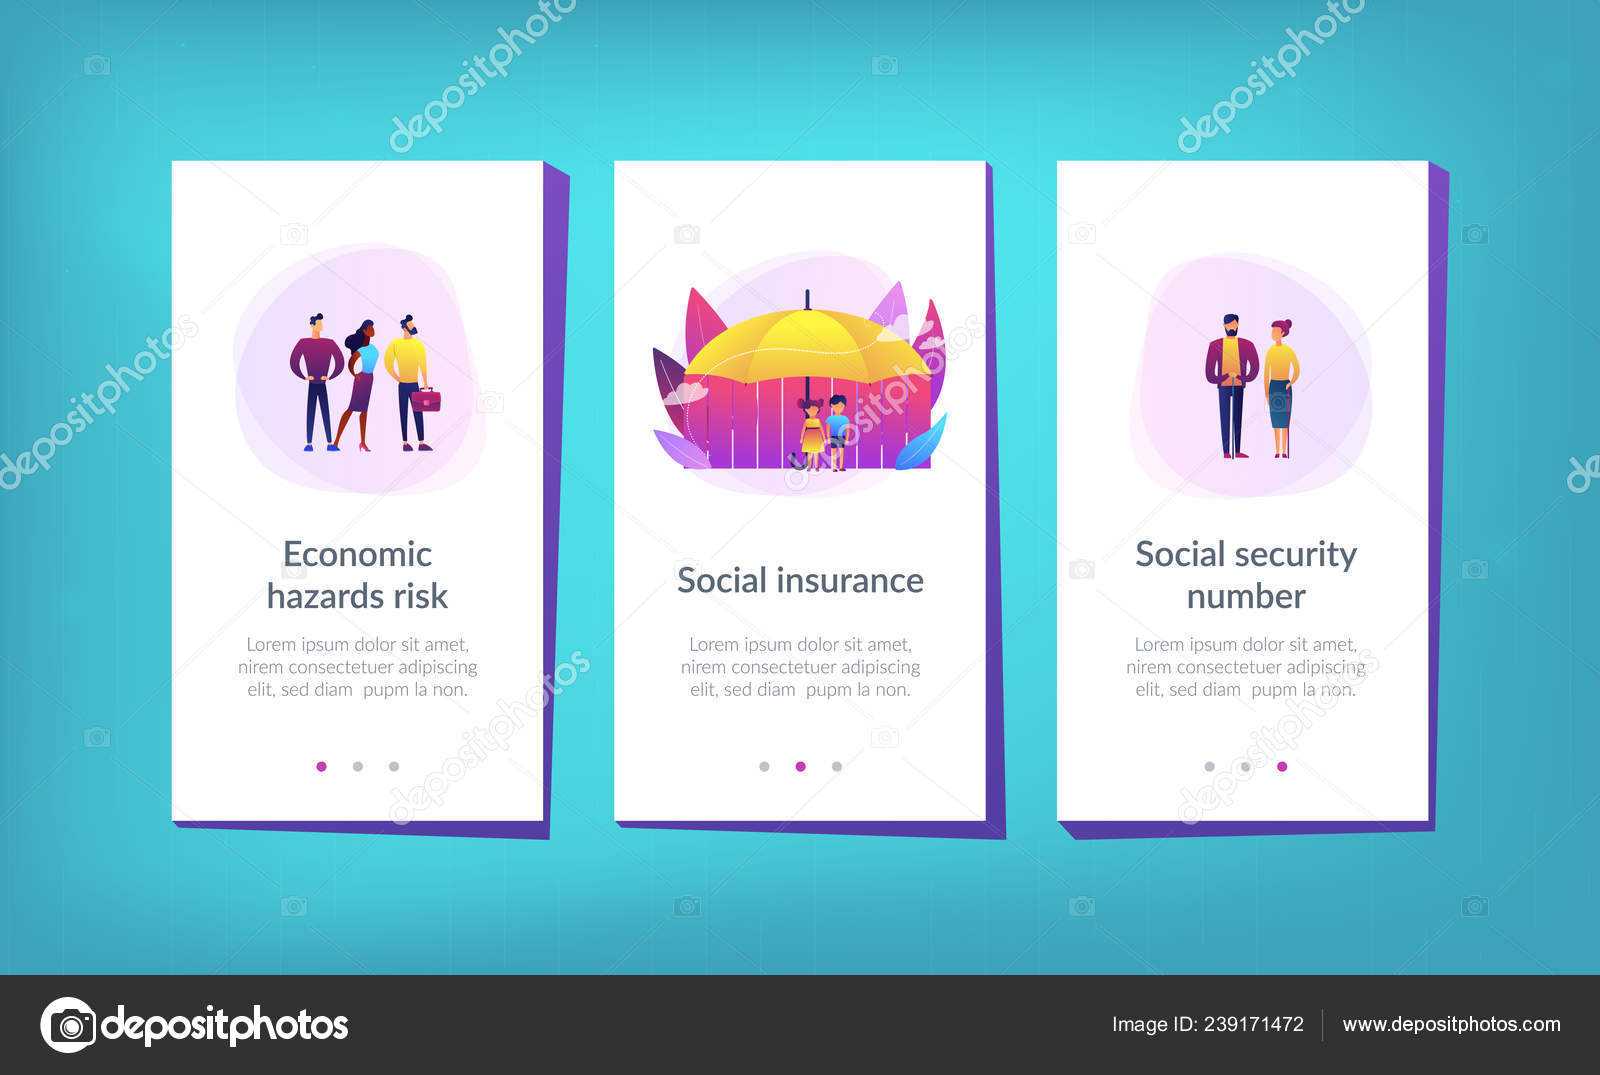 Blank Social Security Card Template | Social Insurance App For Blank Social Security Card Template Download